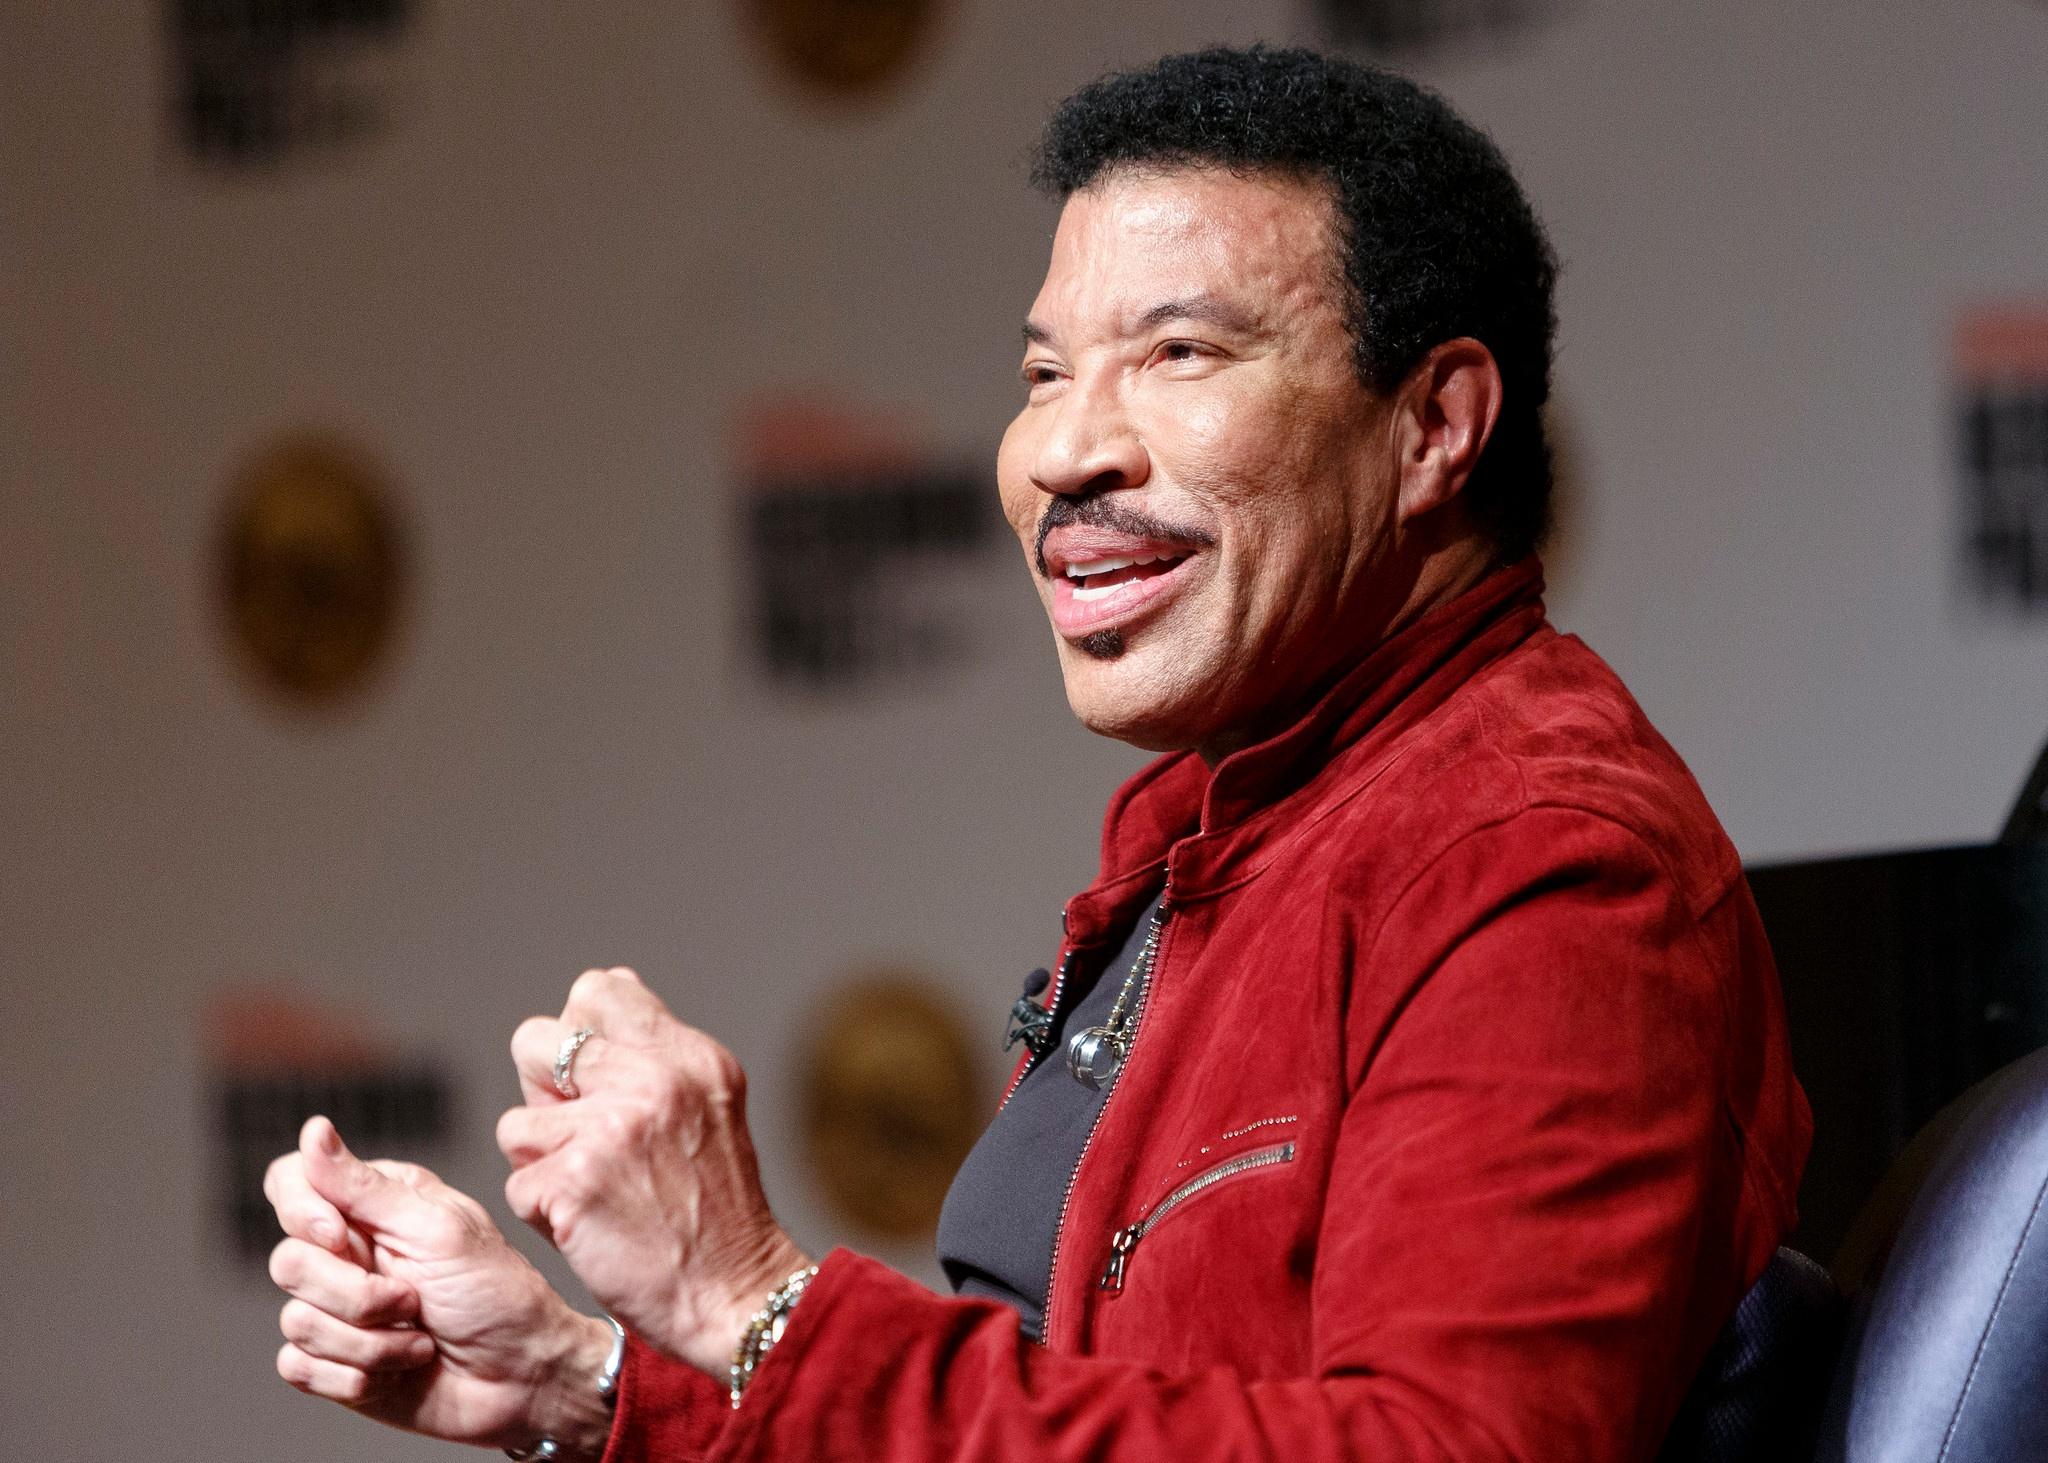 Gershwin Prize for Popular Song honoree Lionel Richie